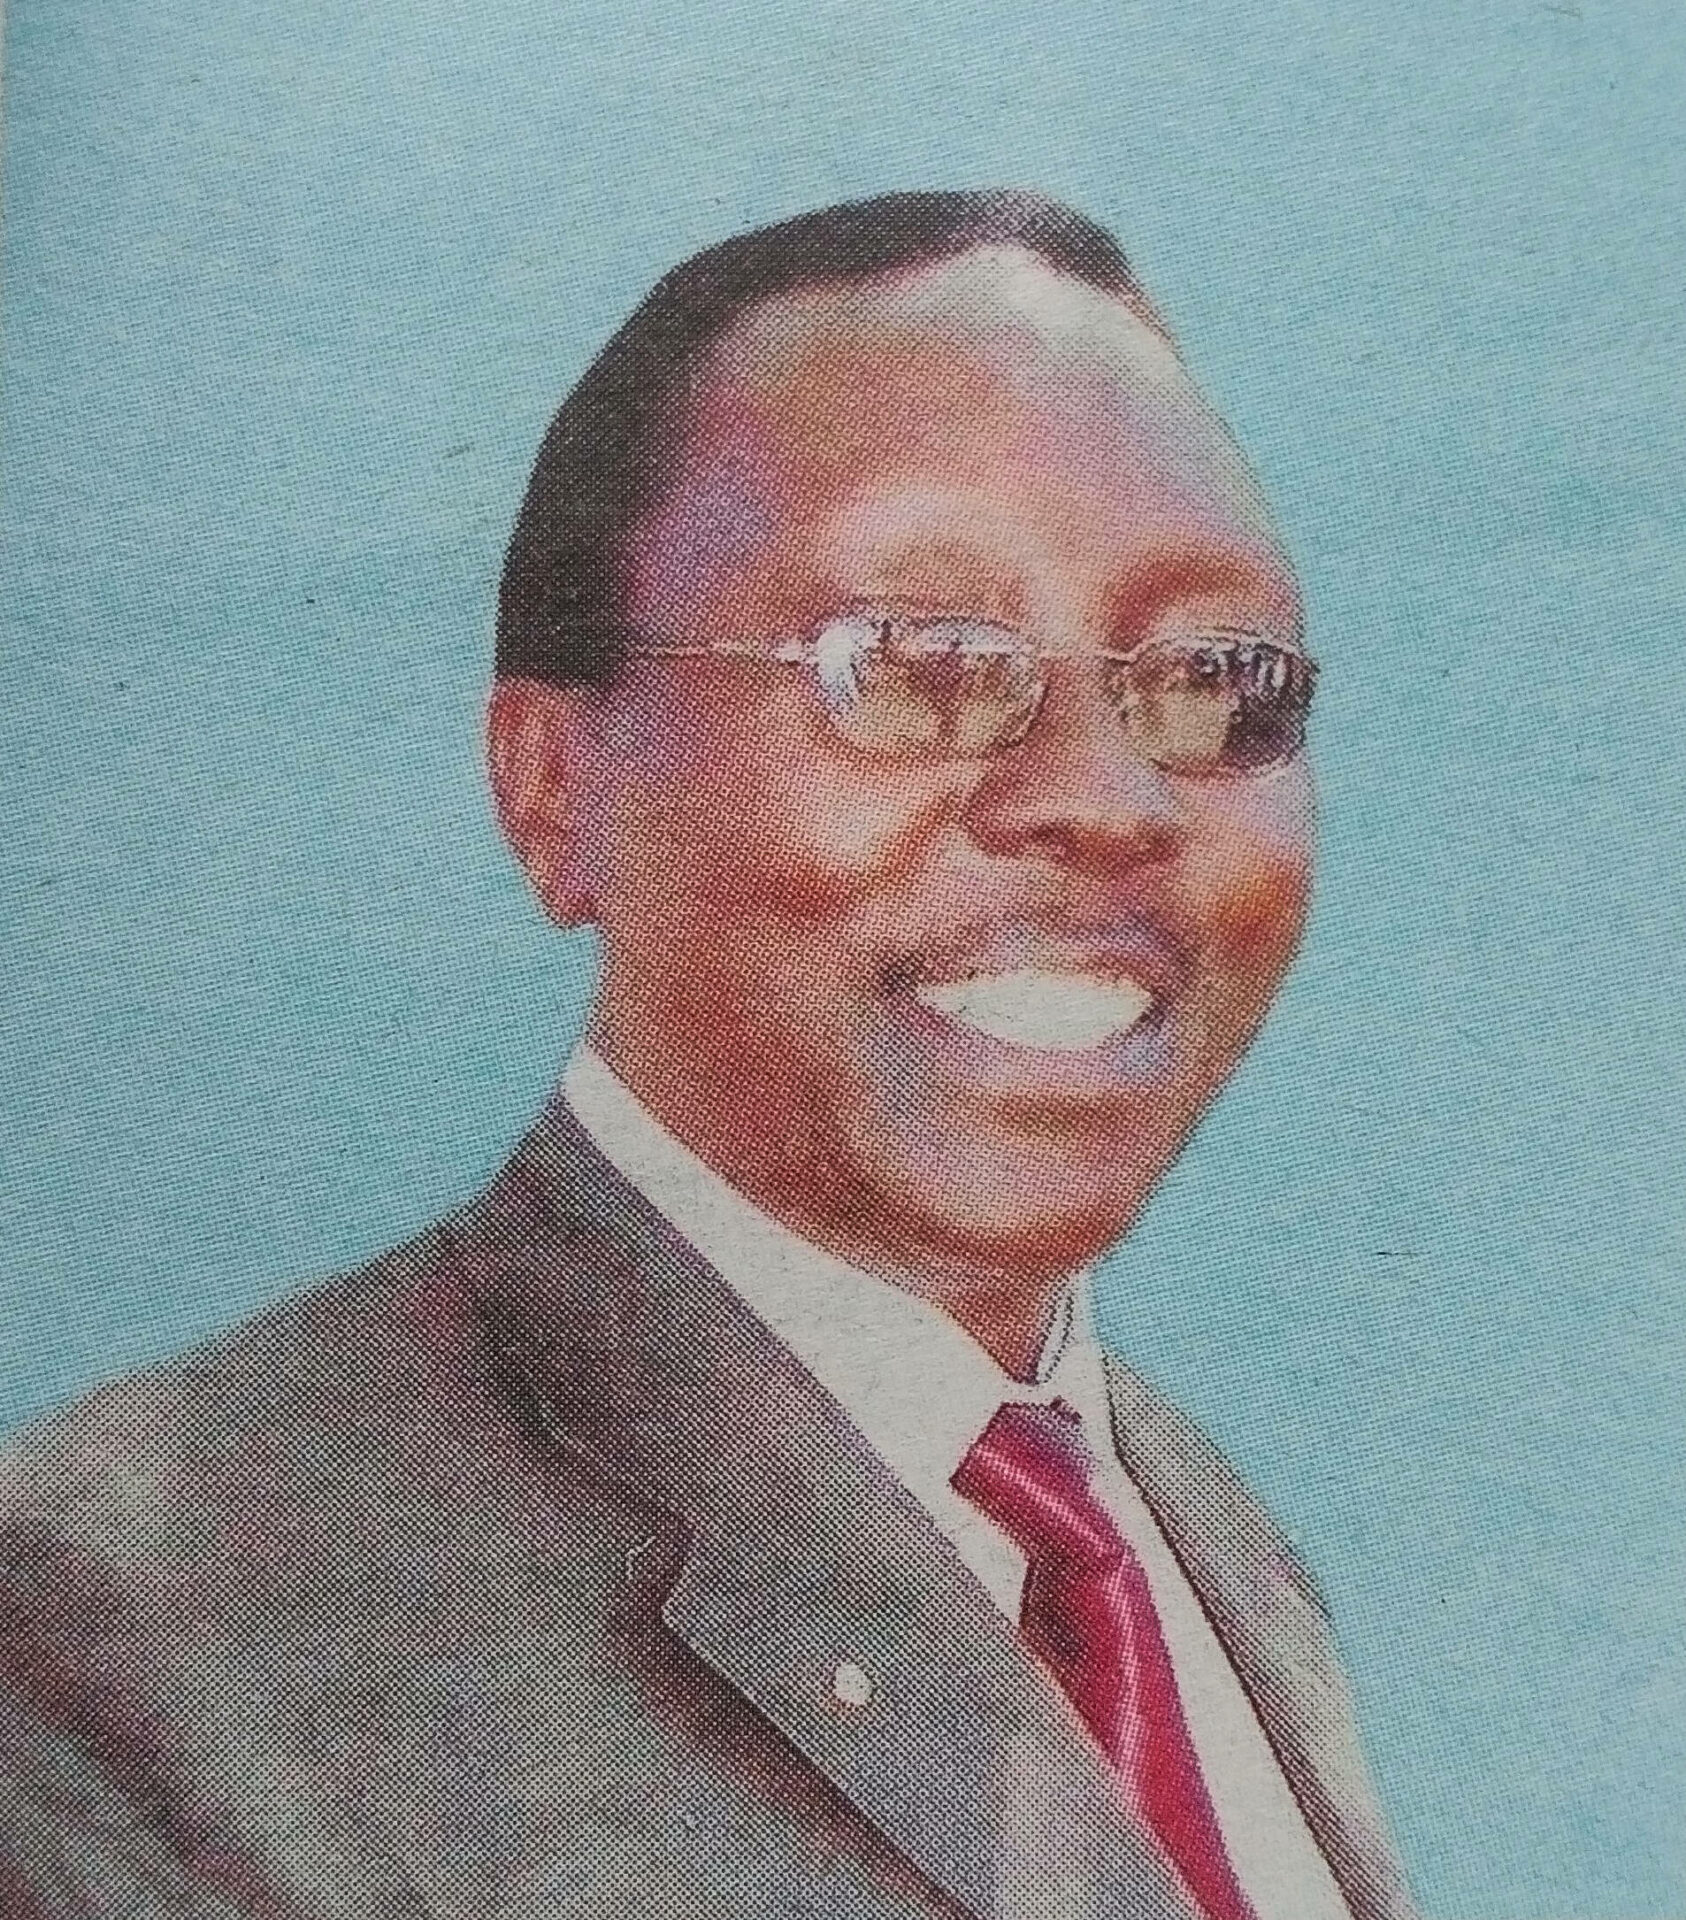 Obituary Image of Dr. Fanuel Oduor Othero